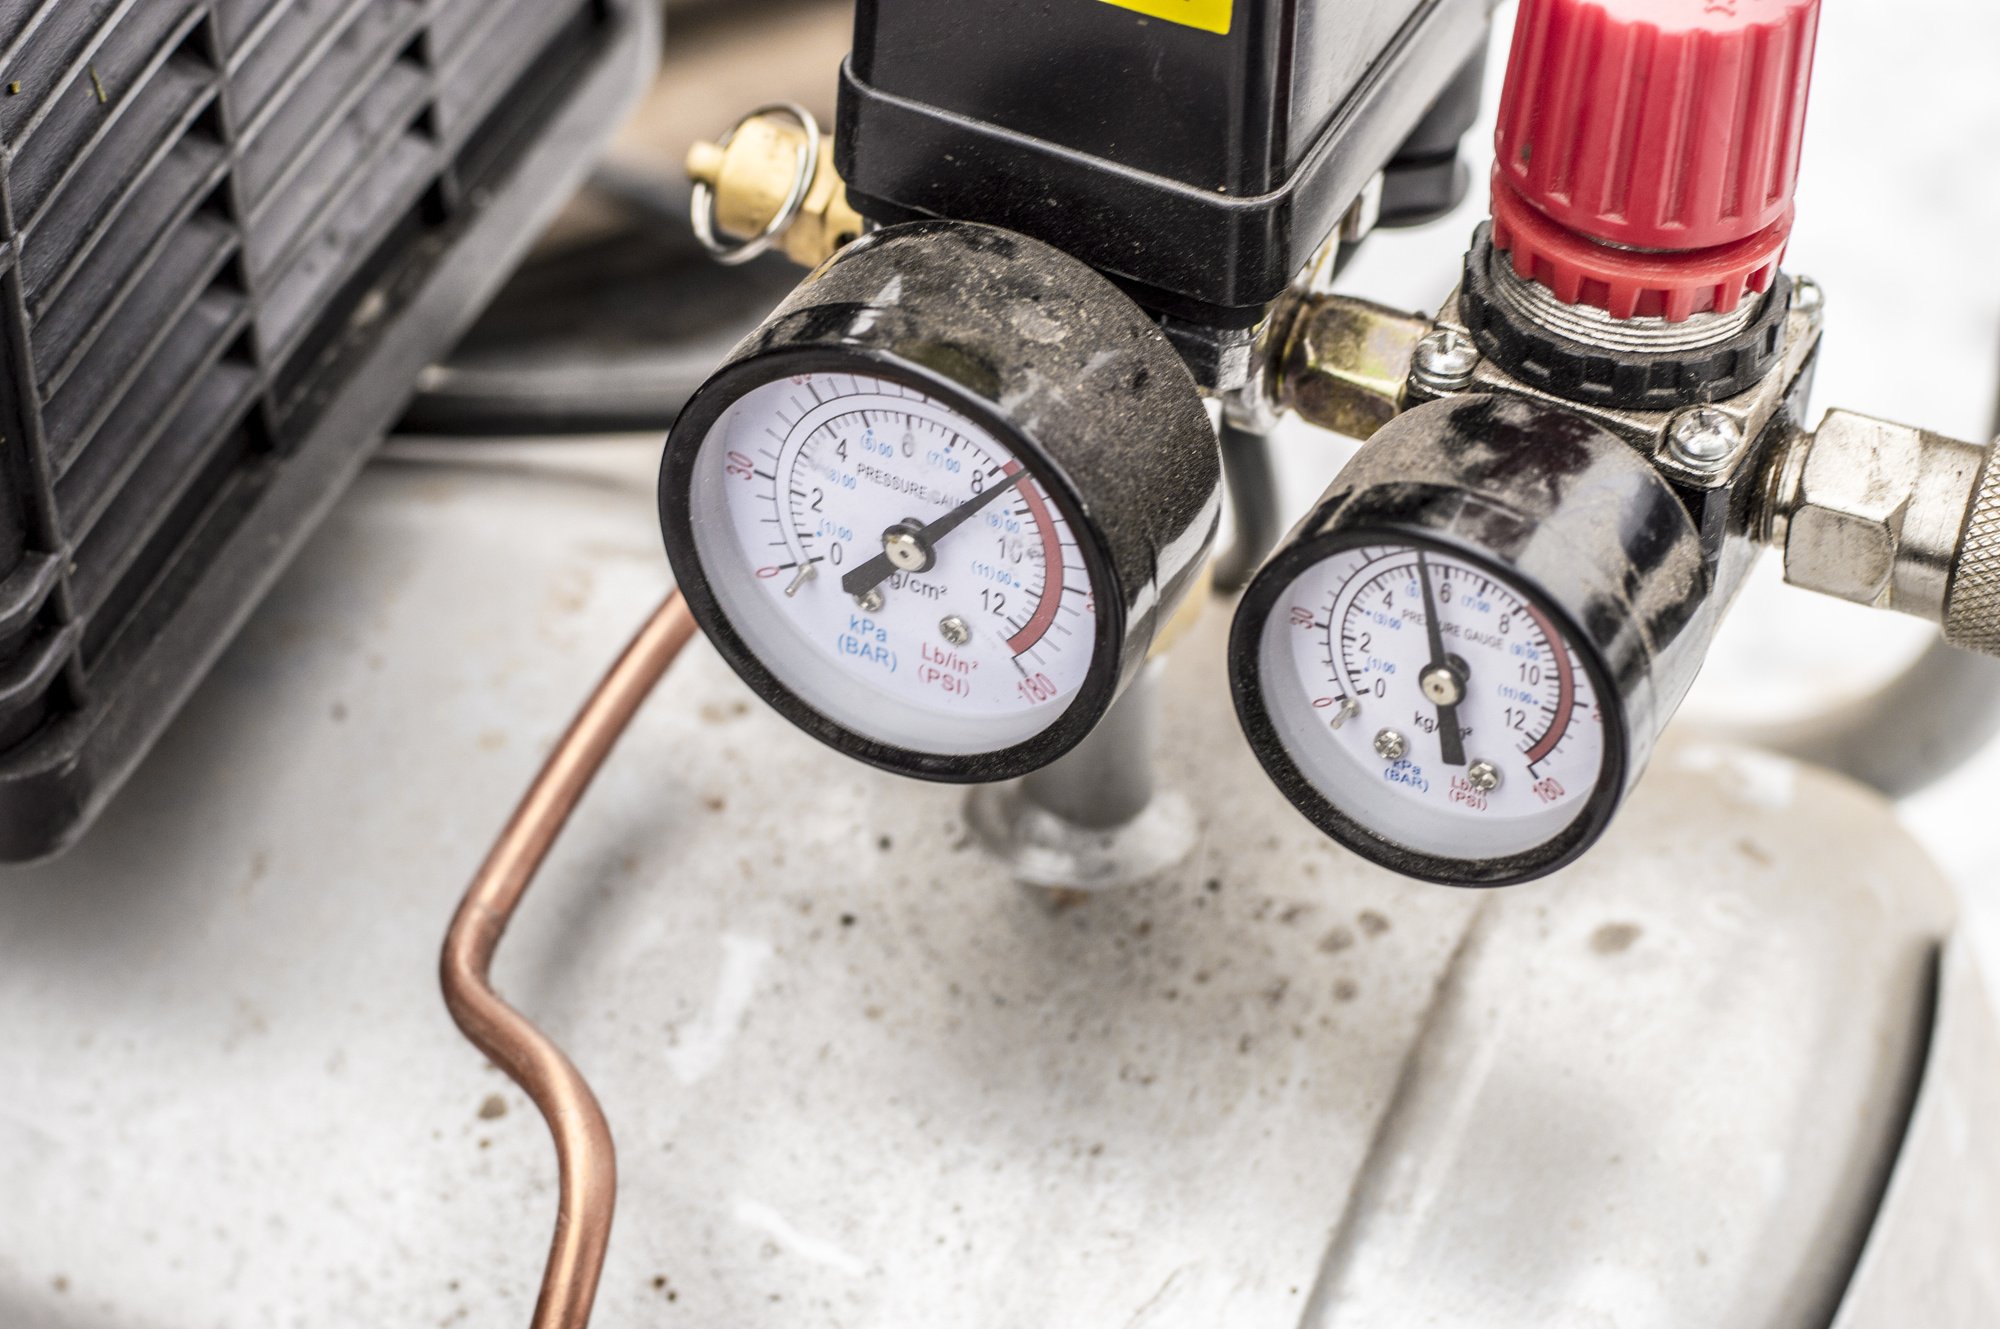 There are several types of AC compressors that you have to choose from for your house. Learn more about your options right here.